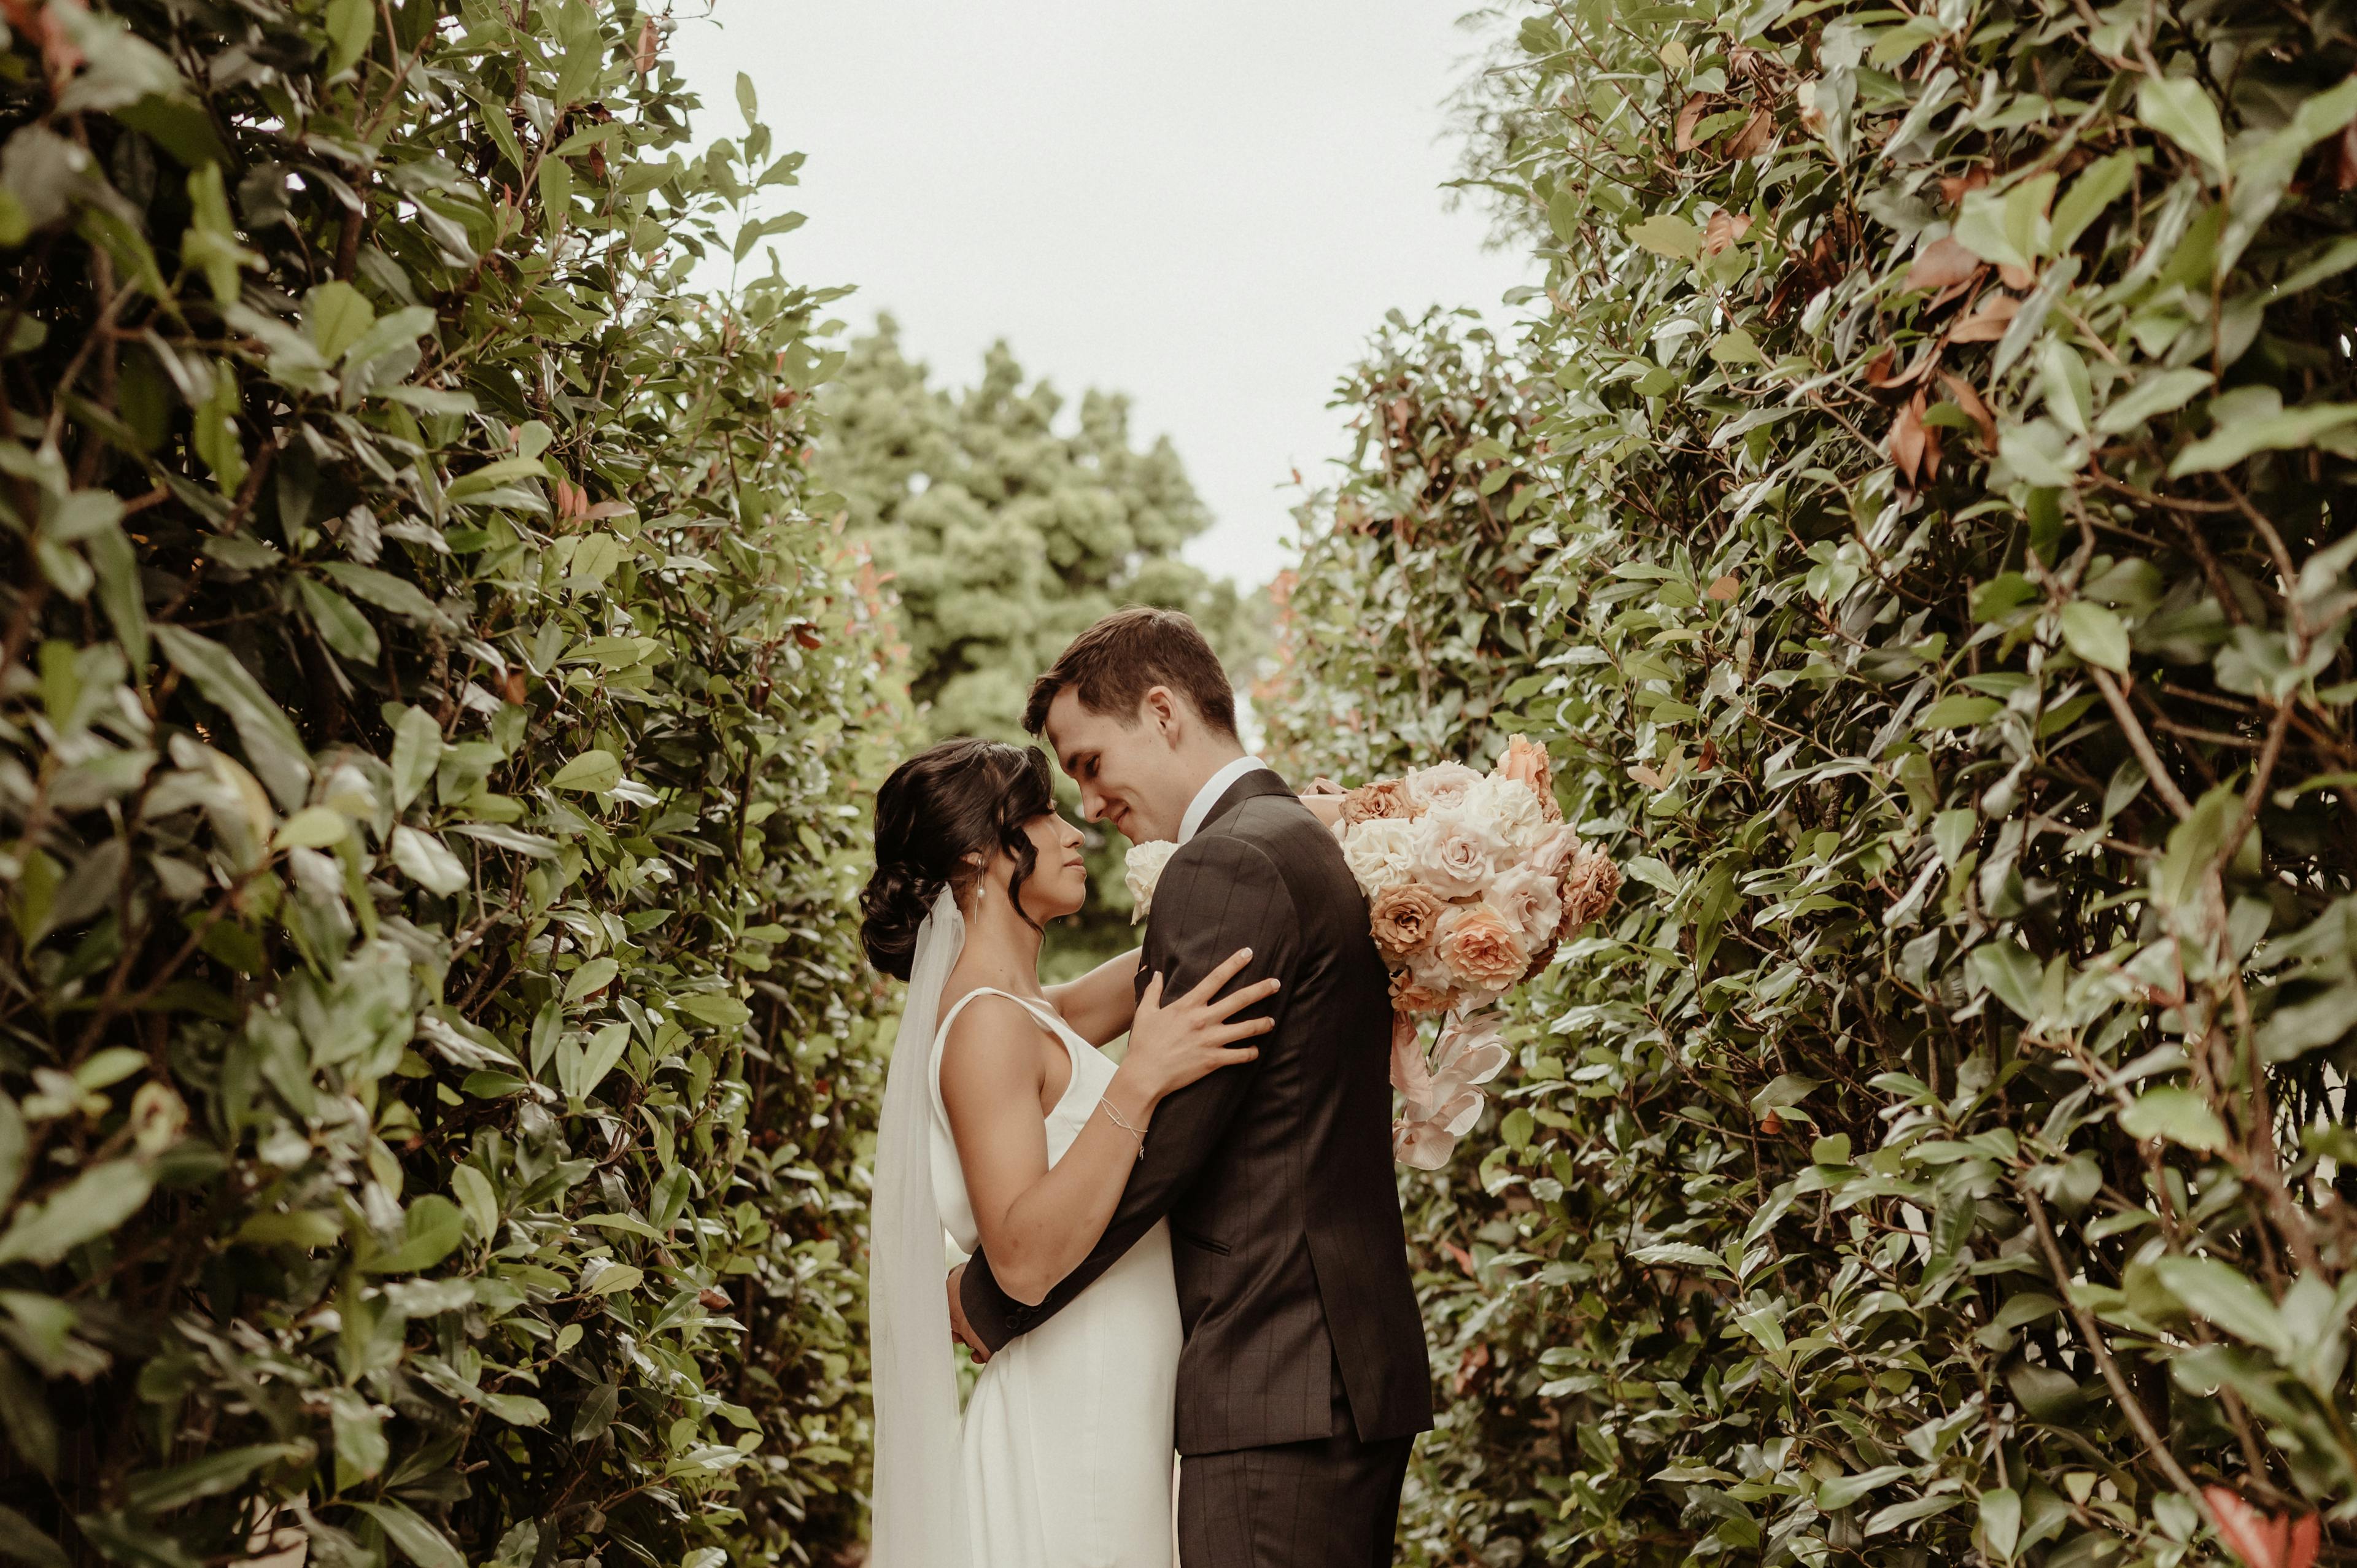 A bride and groom are standing closely in an outdoor setting surrounded by lush greenery. The bride holds a bouquet of peach-colored flowers, and both are gazing lovingly at each other while lightly embracing. The setting appears intimate and serene.